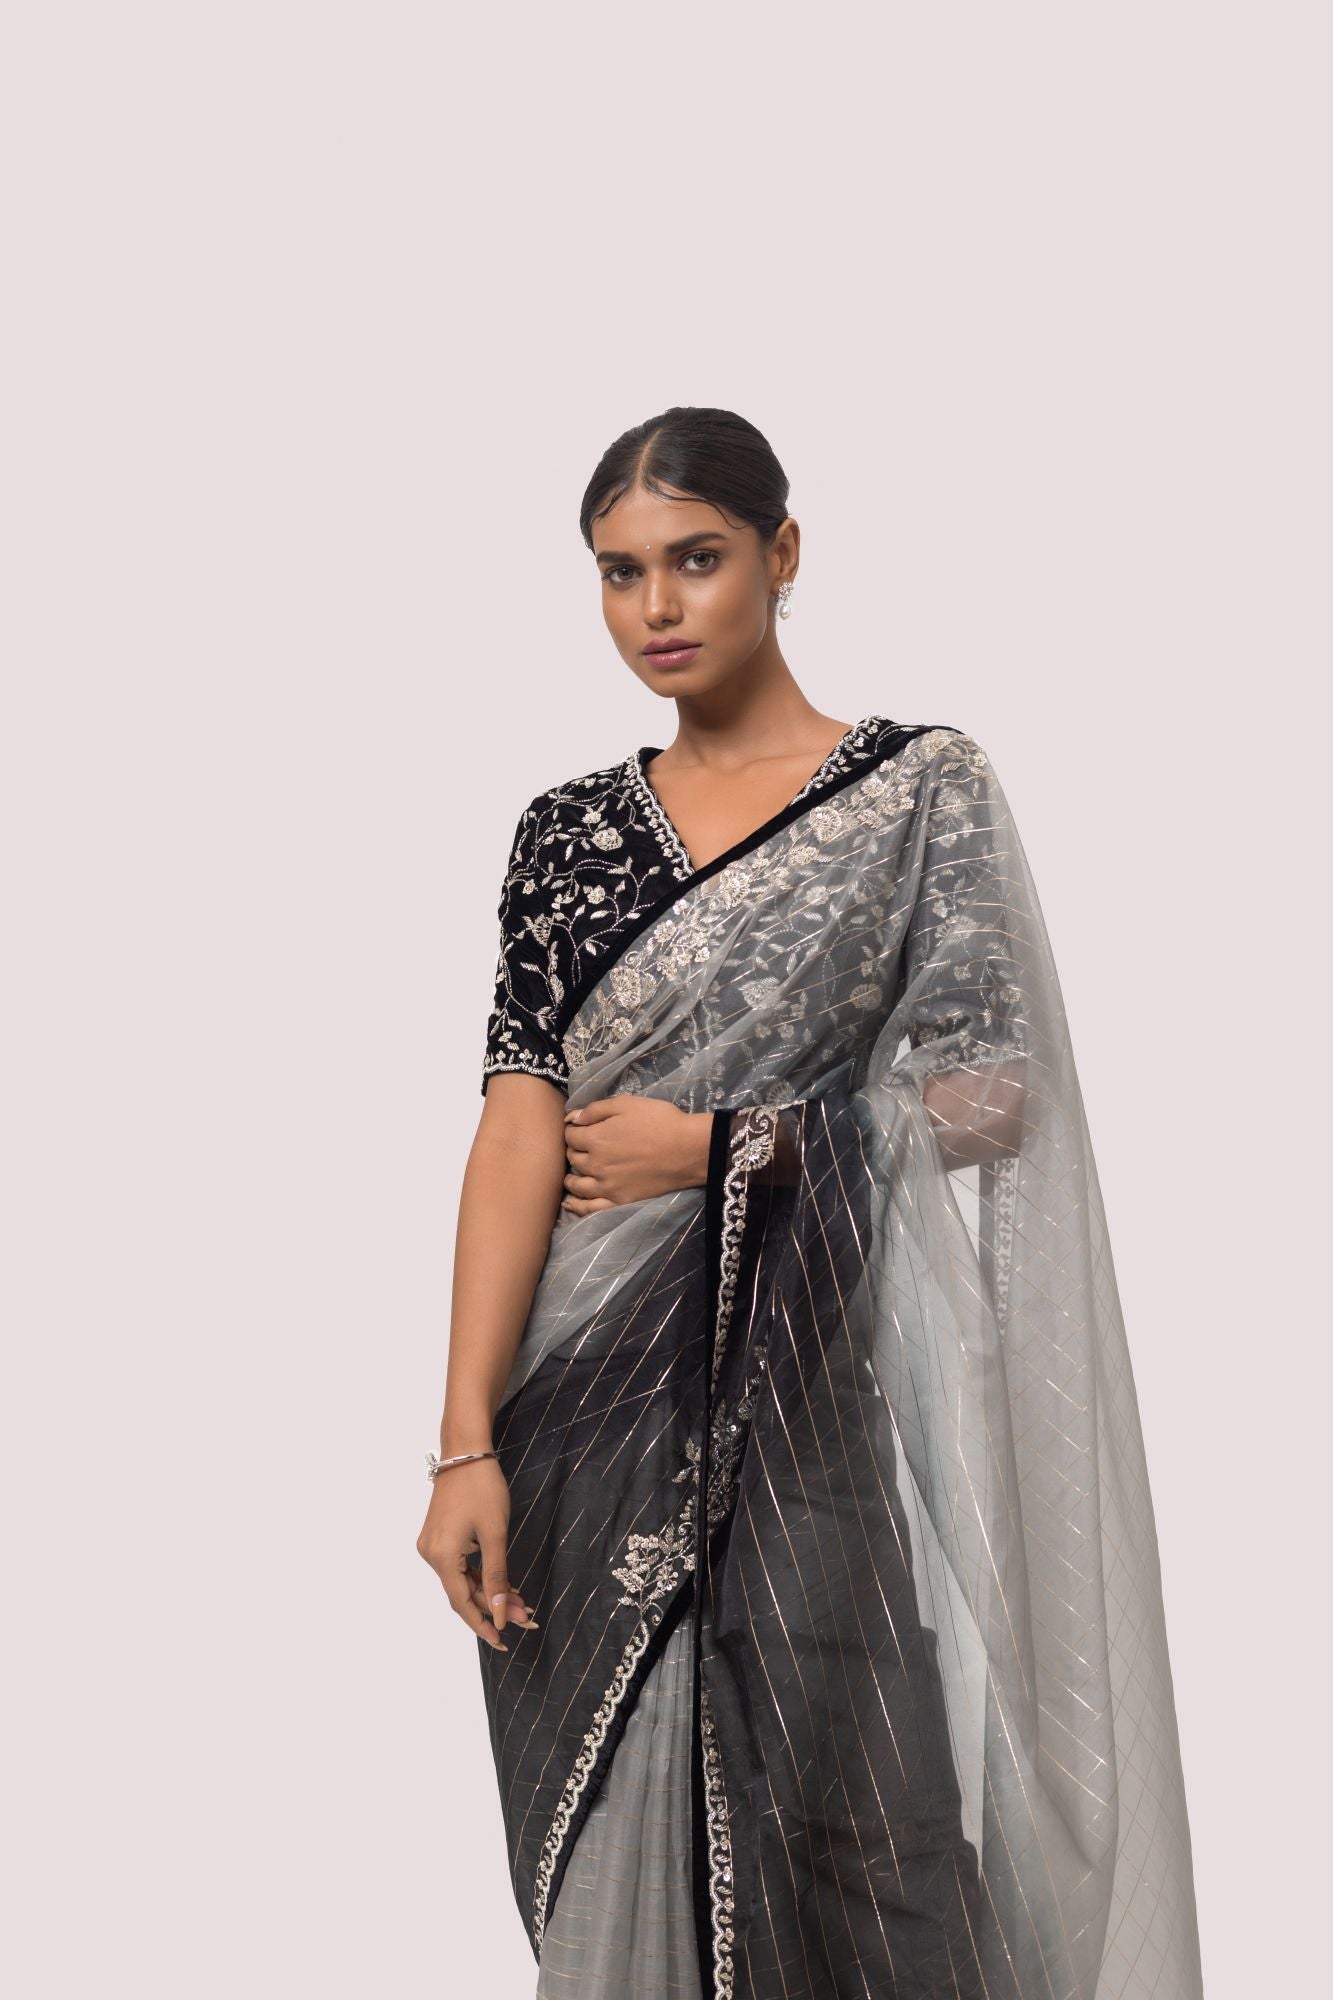 Buy grey and black embroidered organza saree online in USA with velvet saree blouse. Look your best at parties and weddings in beautiful designer sarees, embroidered sarees, handwoven sarees, silk sarees, organza saris from Pure Elegance Indian saree store in USA.-closeup